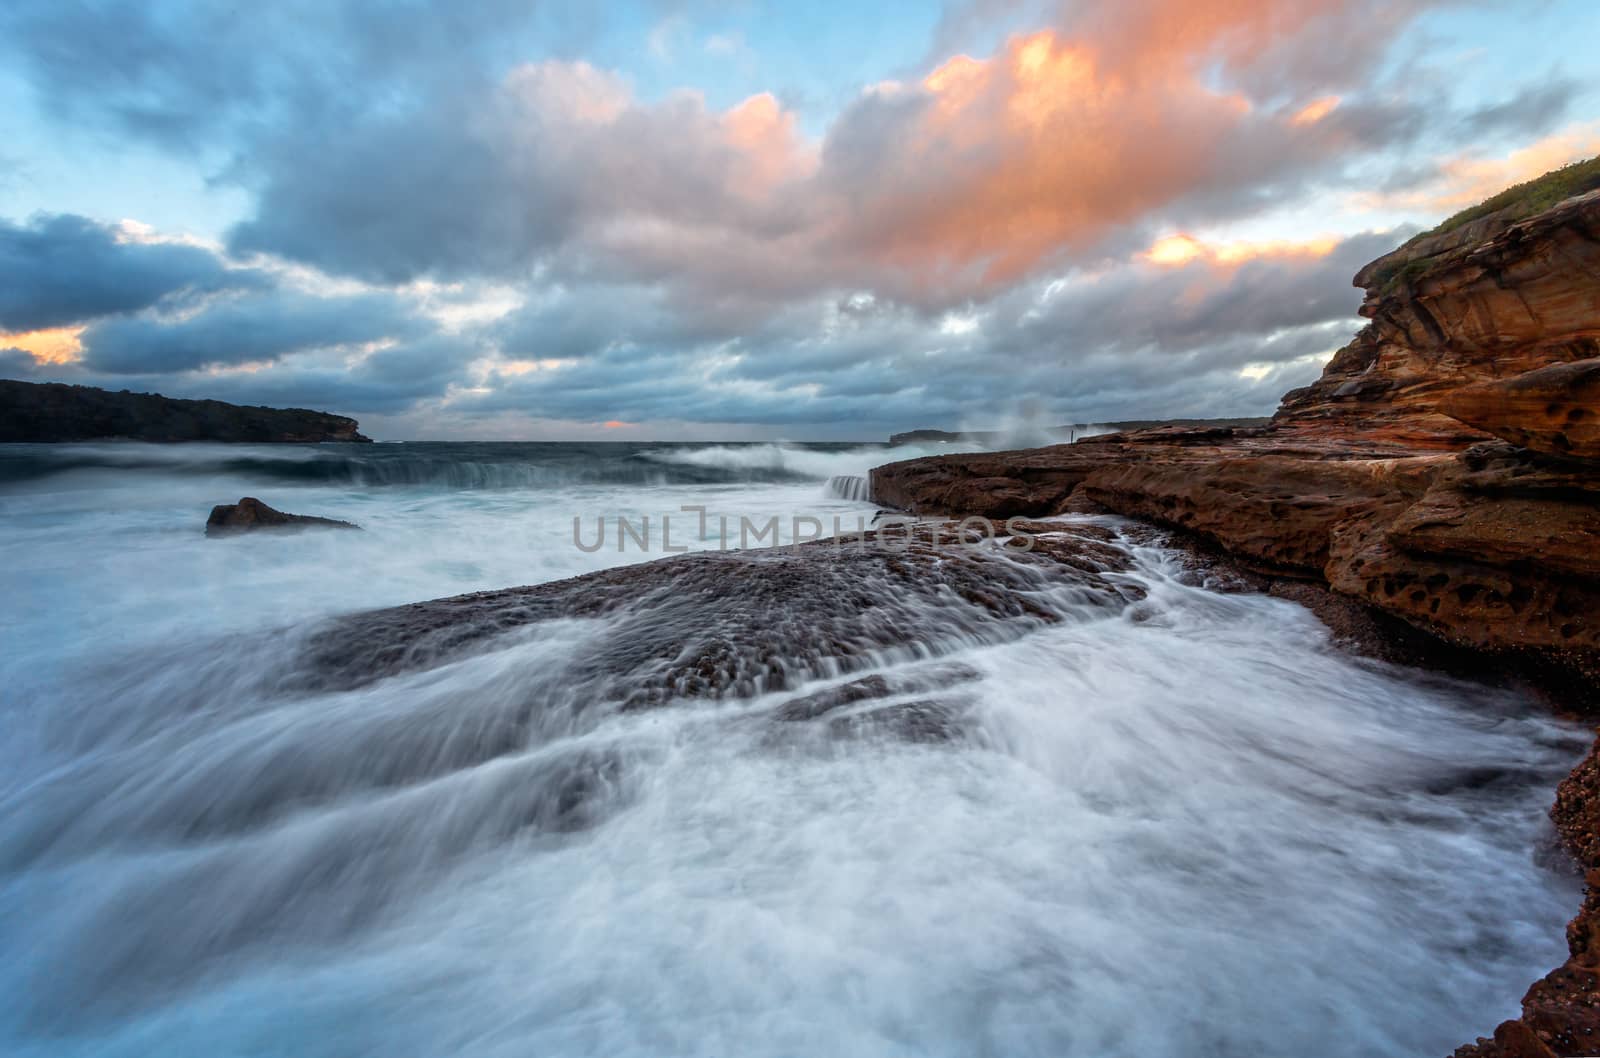 Waves crash onto the rocky shore of Bare Island by lovleah